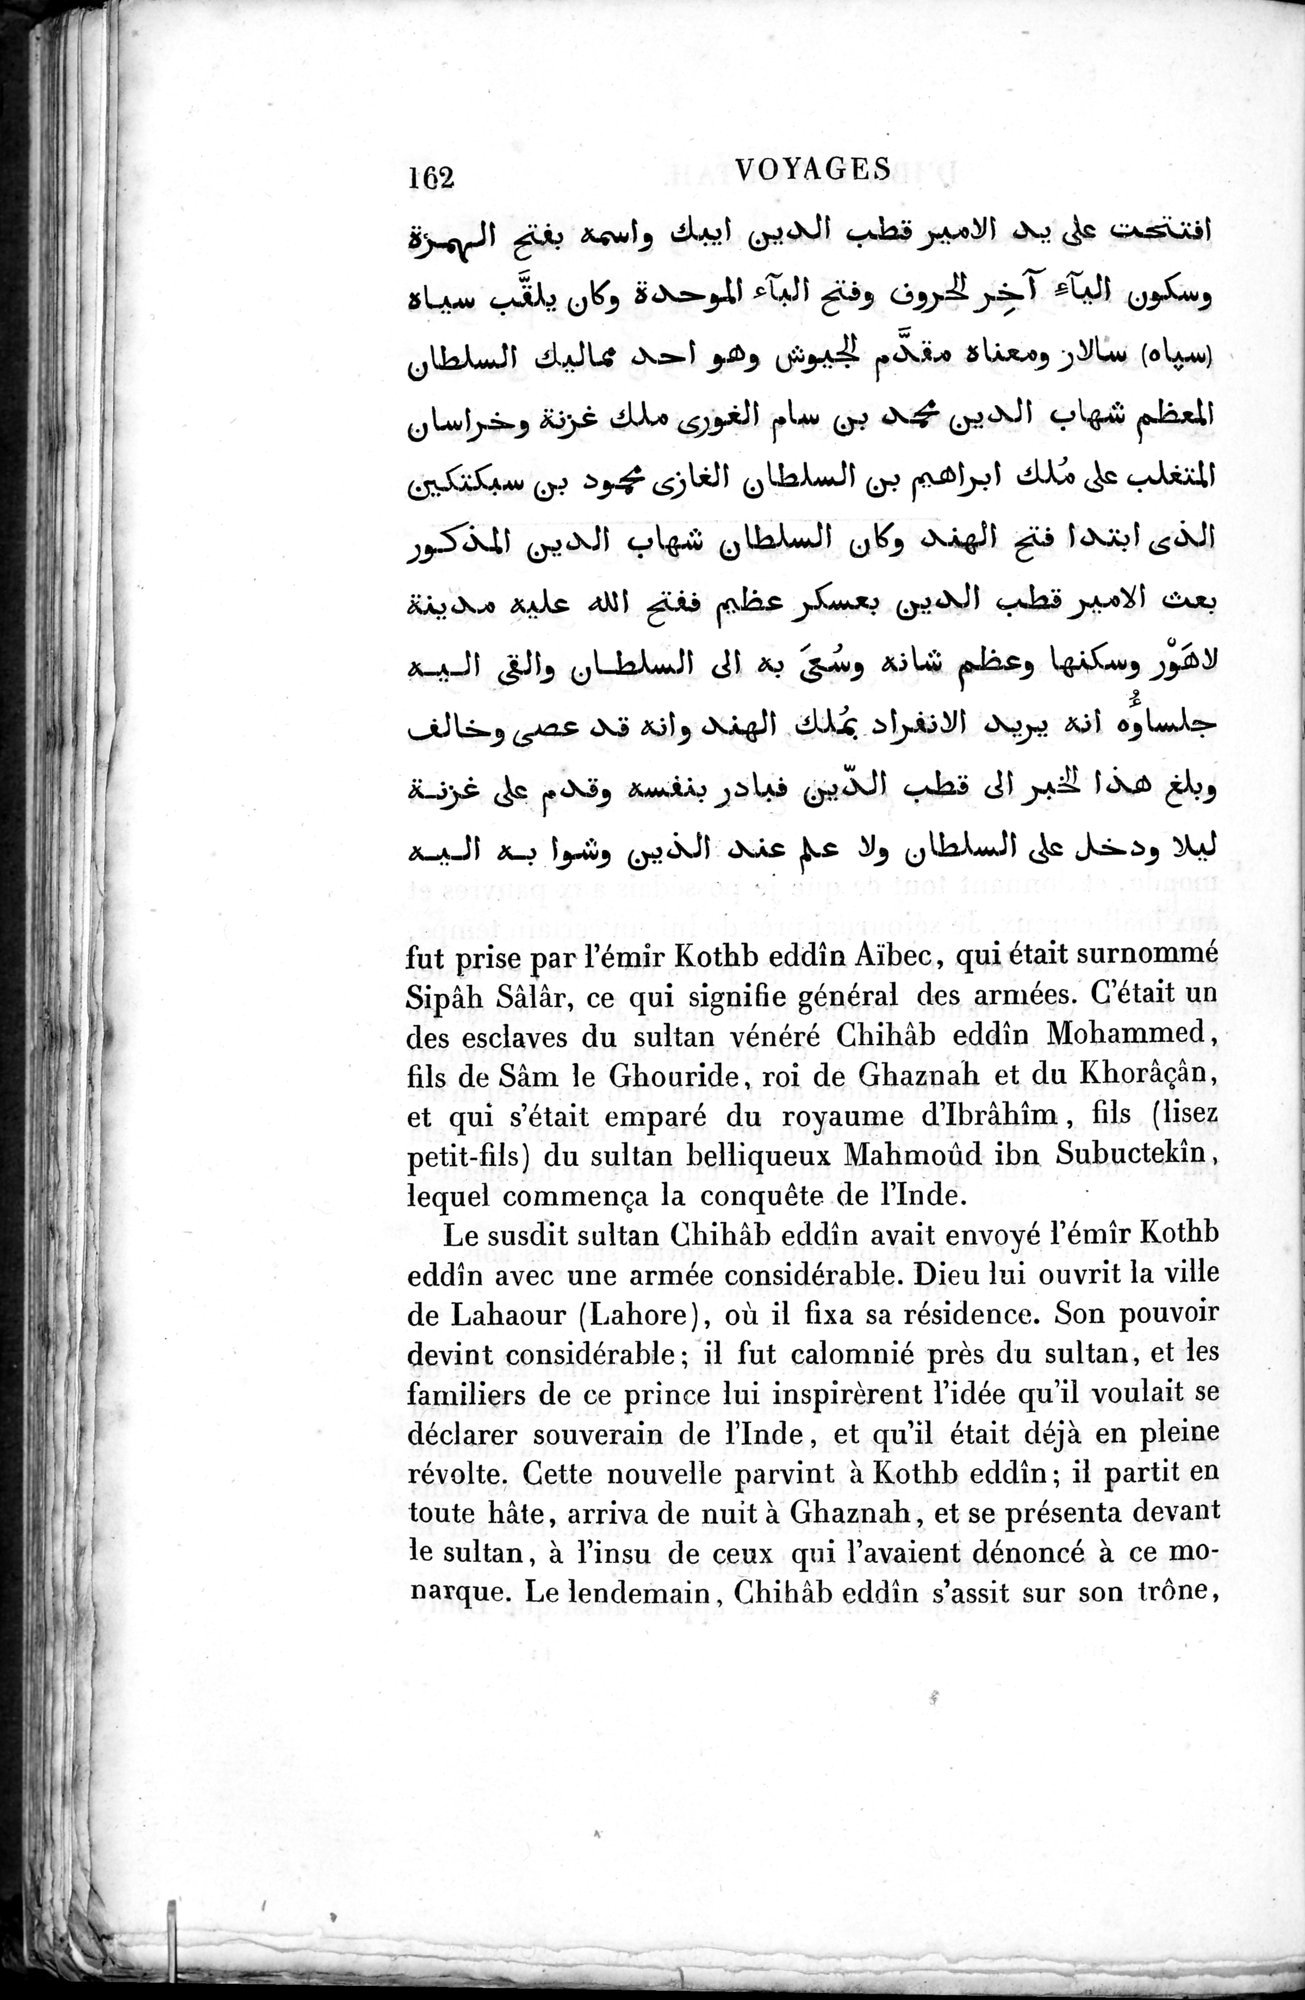 Voyages d'Ibn Batoutah : vol.3 / Page 202 (Grayscale High Resolution Image)